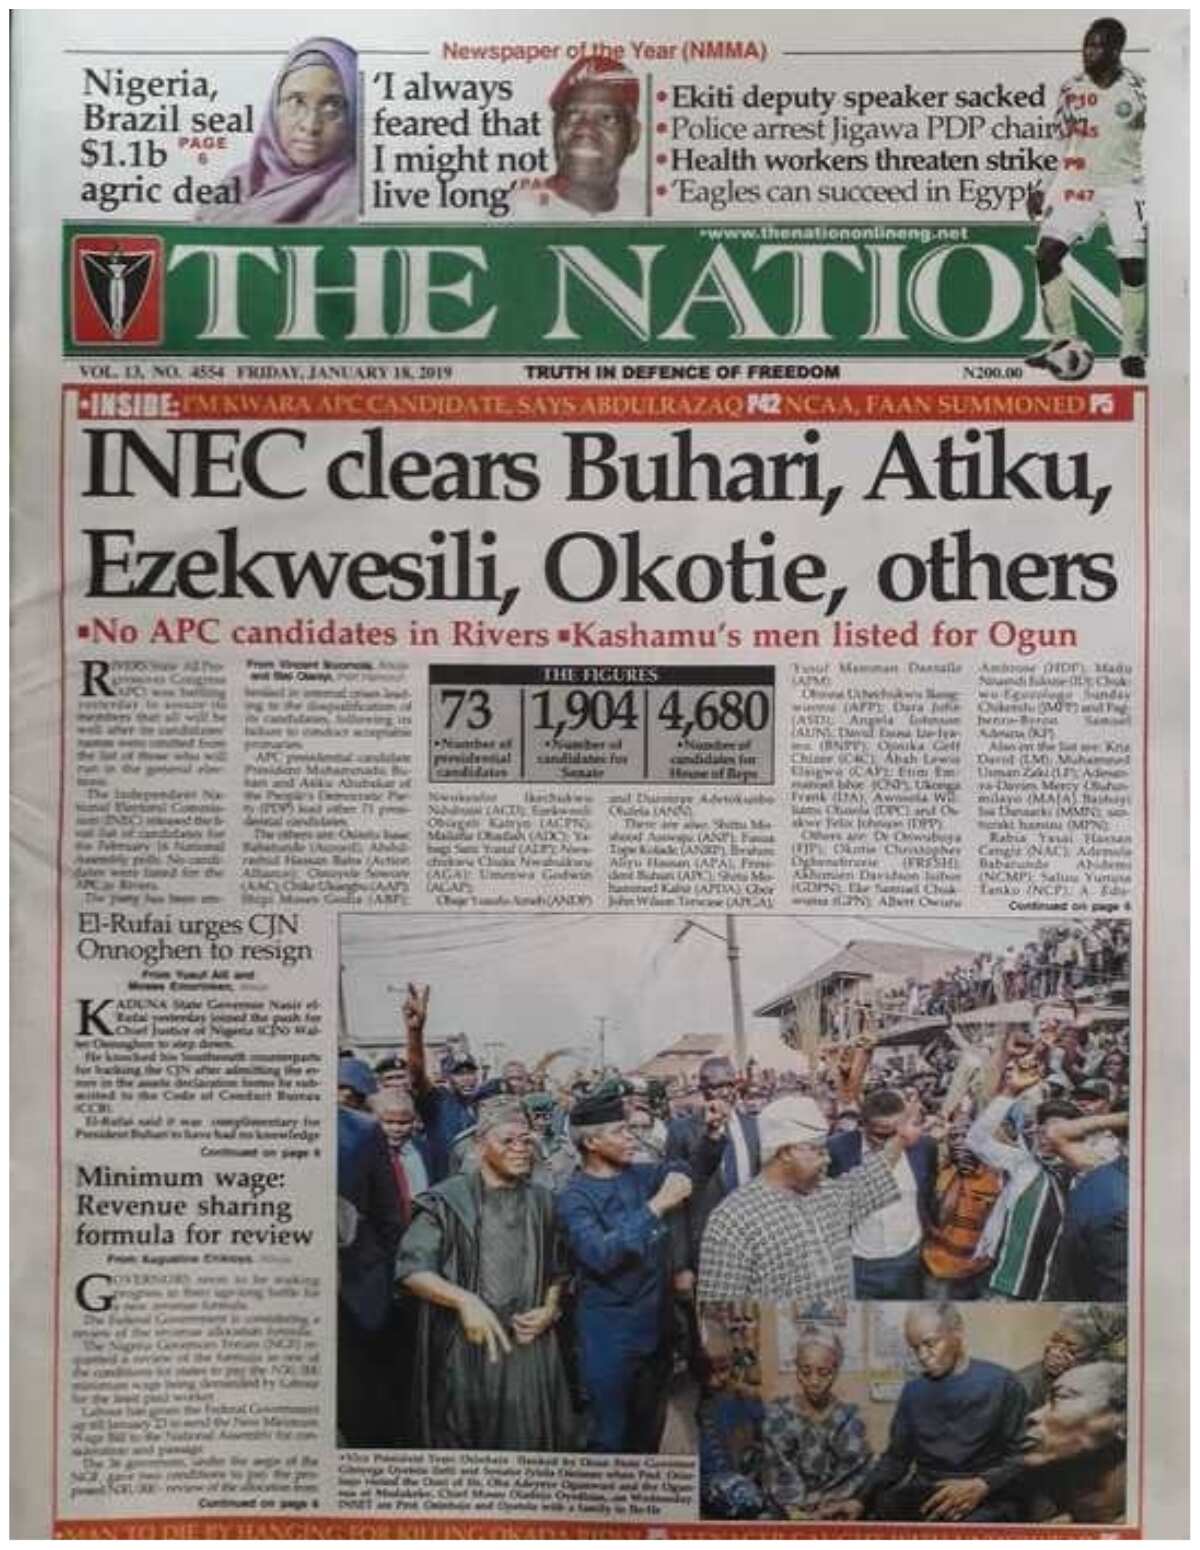 Newspsper Review: FG's plan collapses as Atiku lands in US